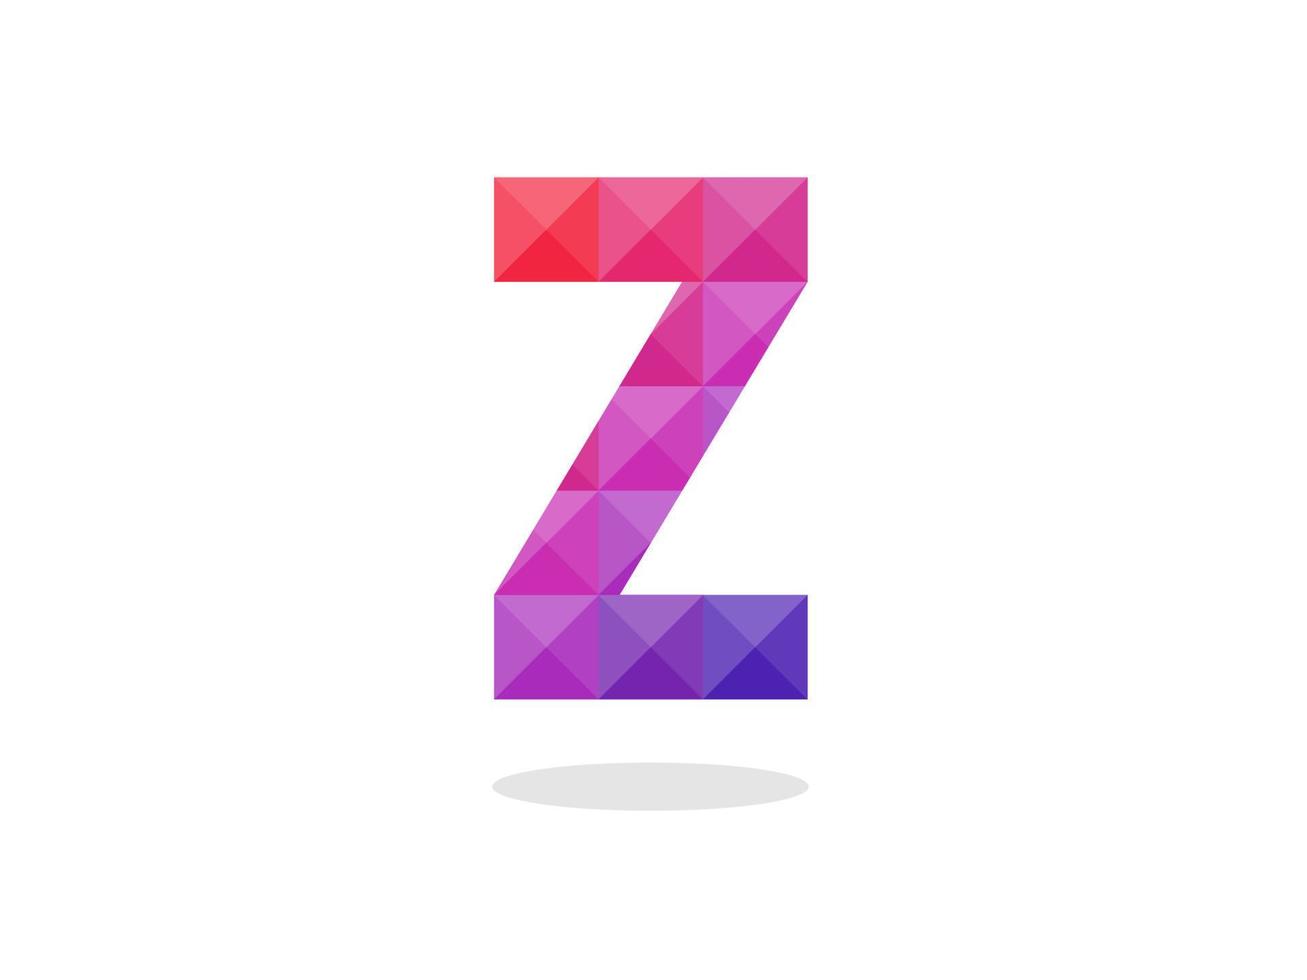 Geometric Letter Z logo with perfect combination of red-blue colors. vector